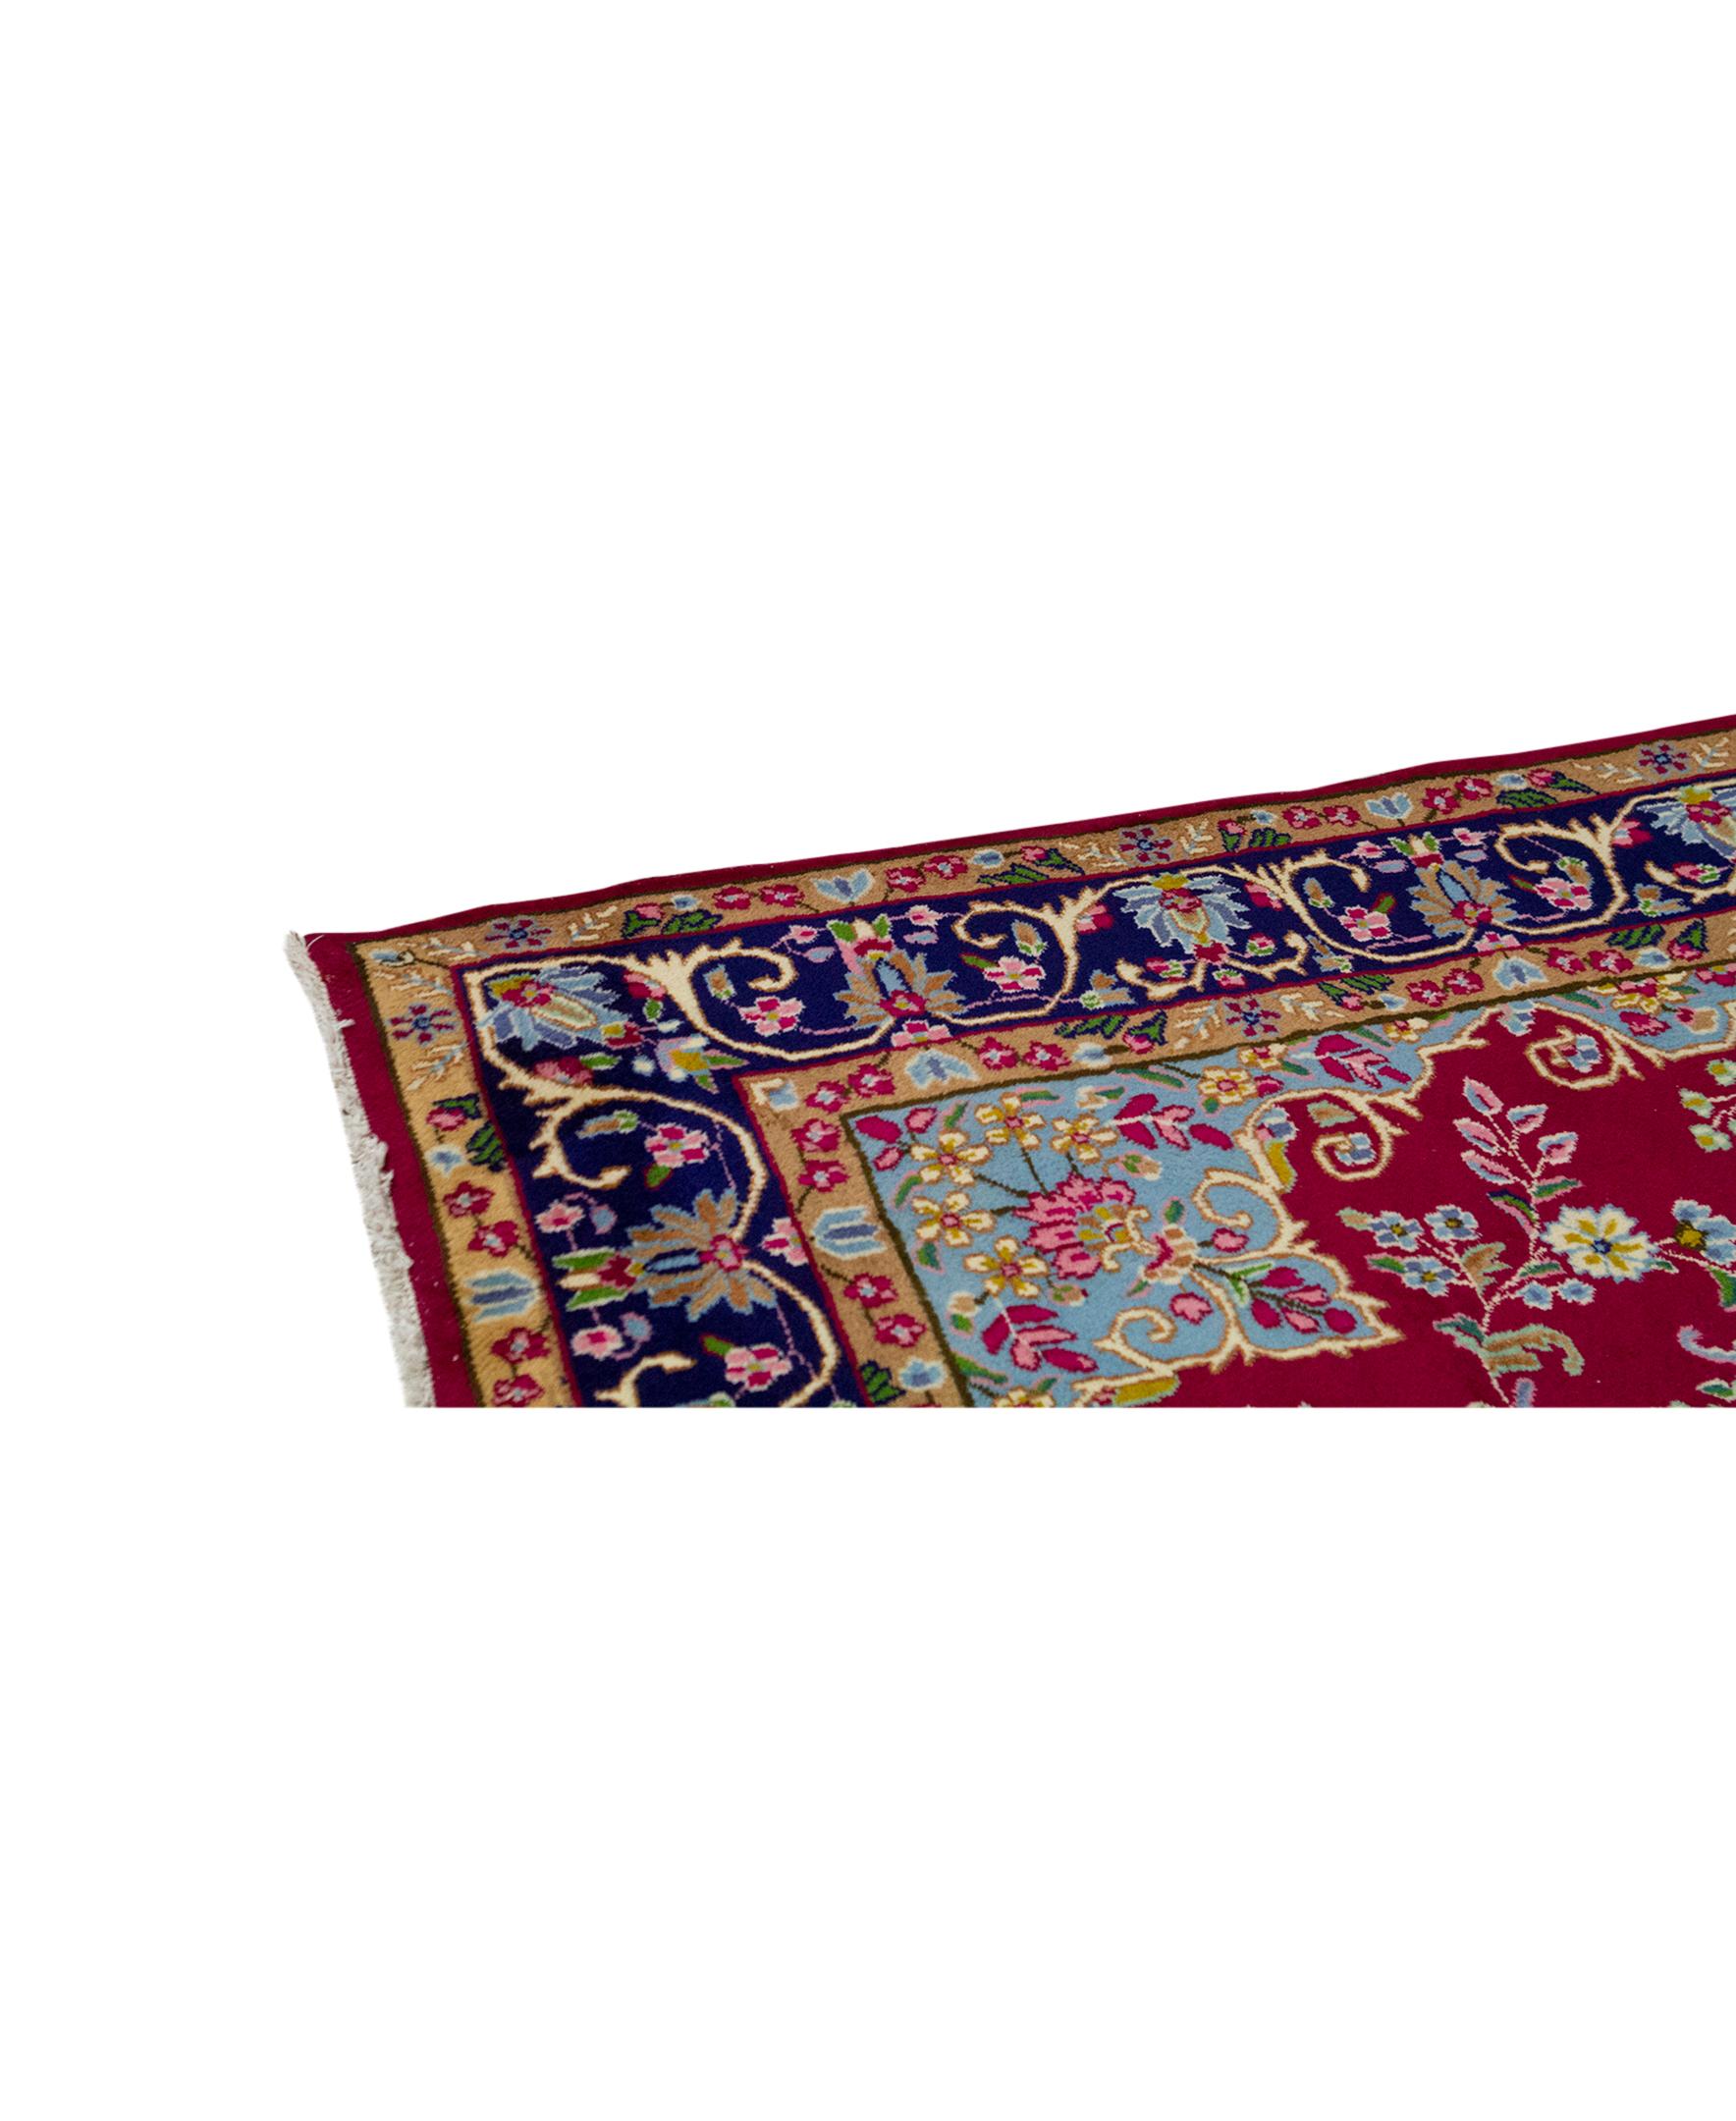 Antique Persian Fine Traditional Handwoven Luxury Wool Red / Navy Rug. Size: 6'-5